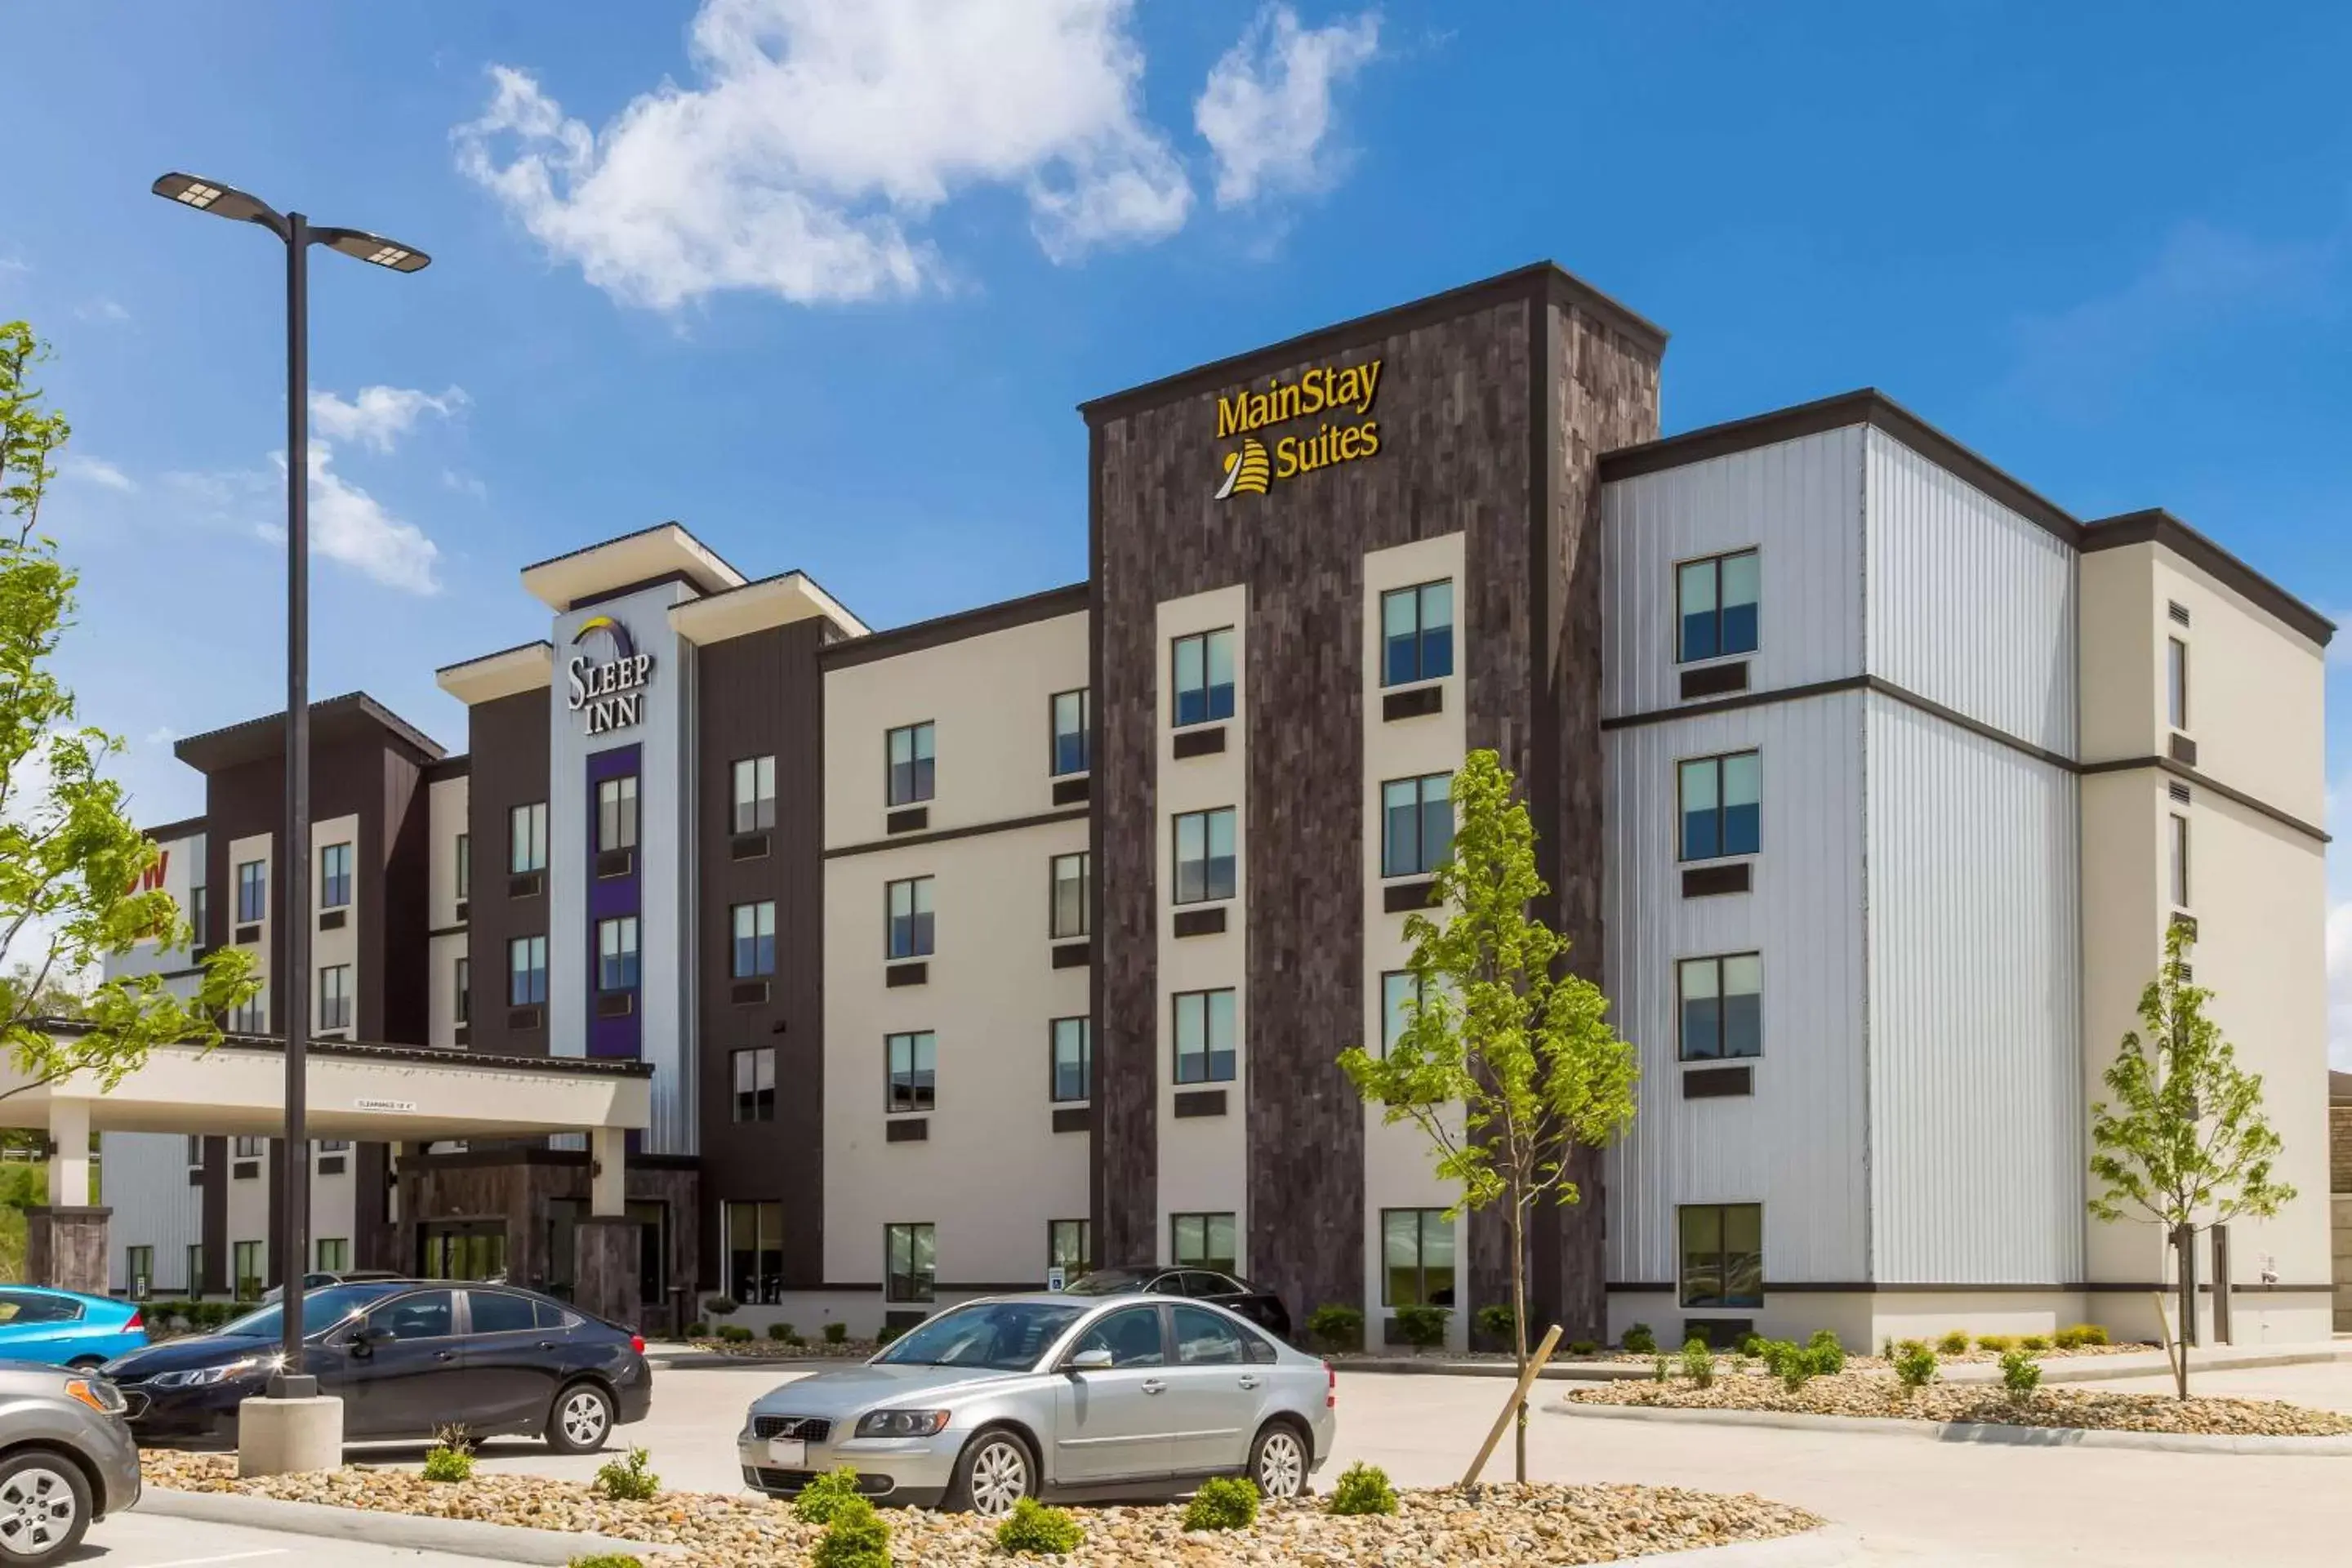 Property building in MainStay Suites Logan Ohio-Hocking Hills